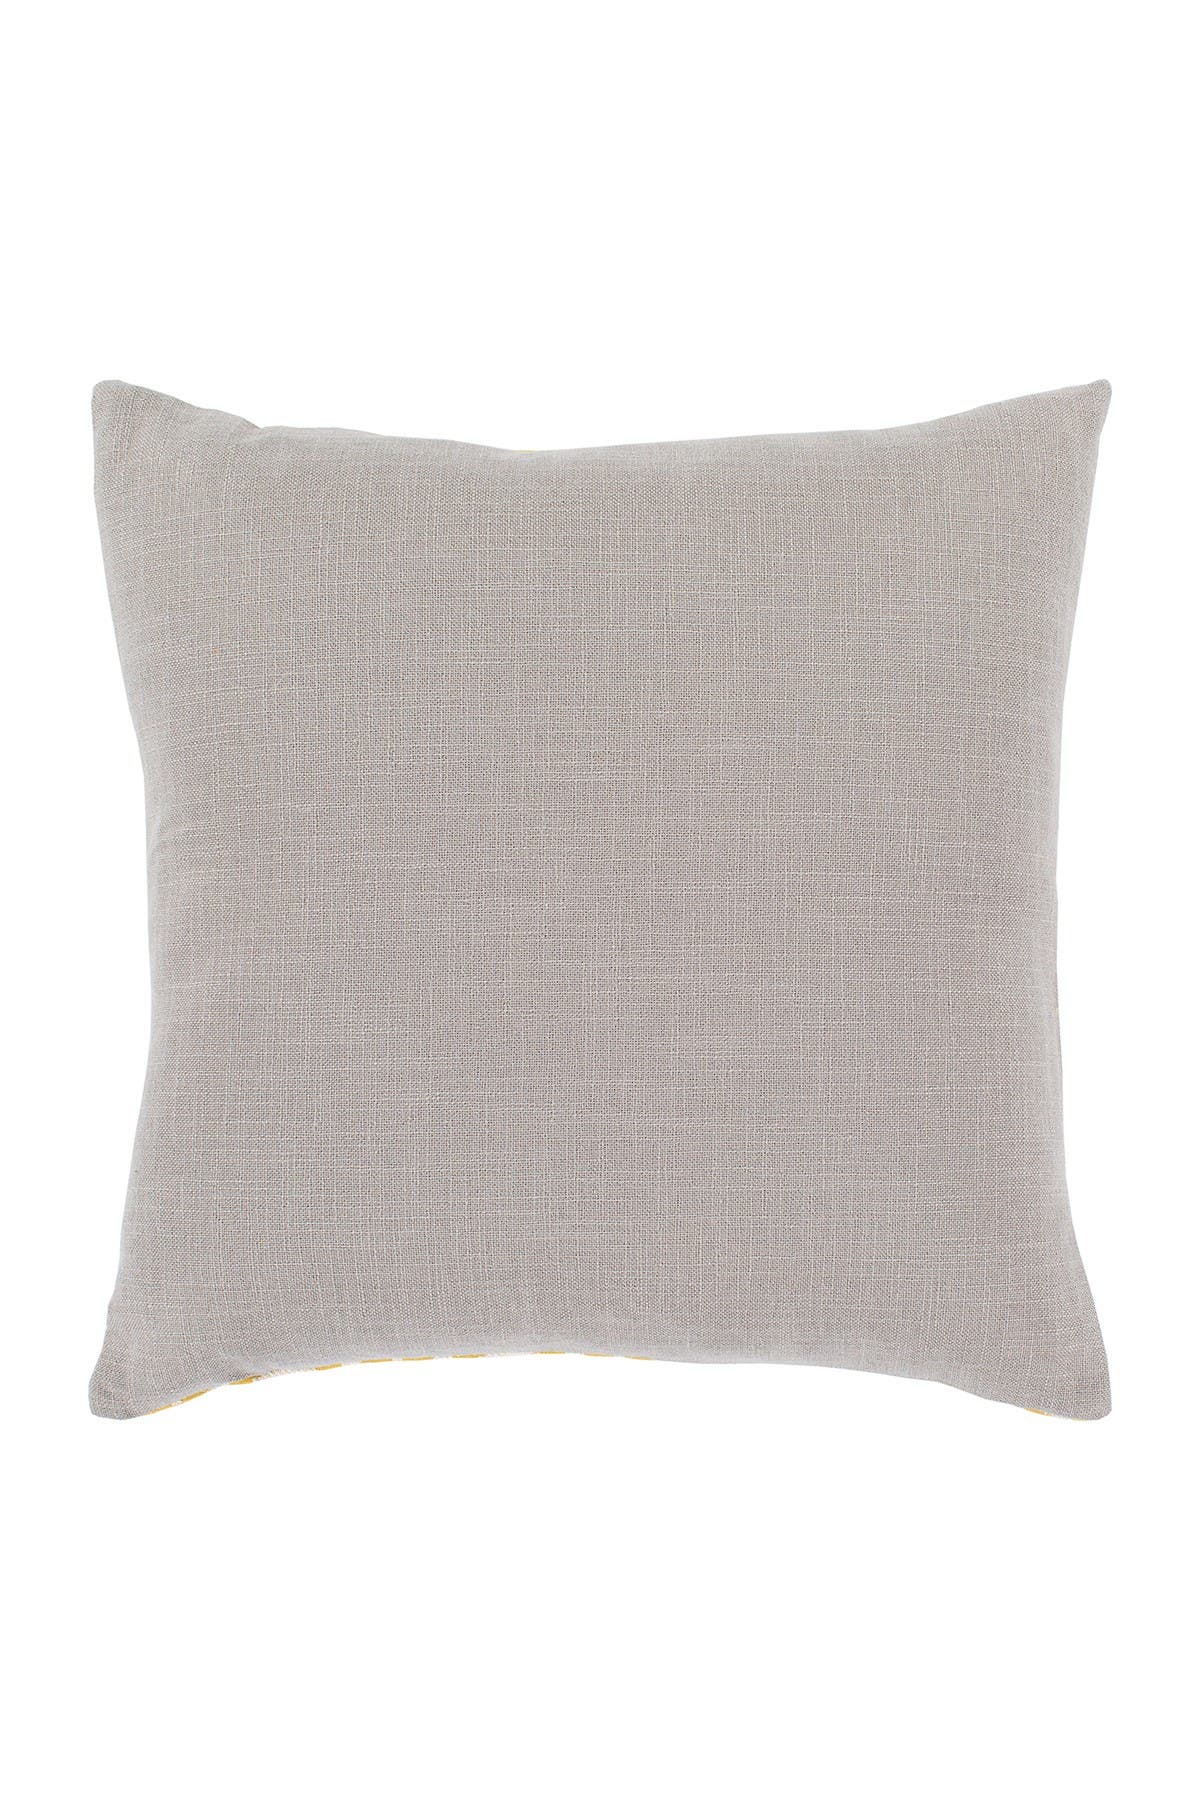 Surya Home Kanga Pillow Cover In Open Miscellaneous